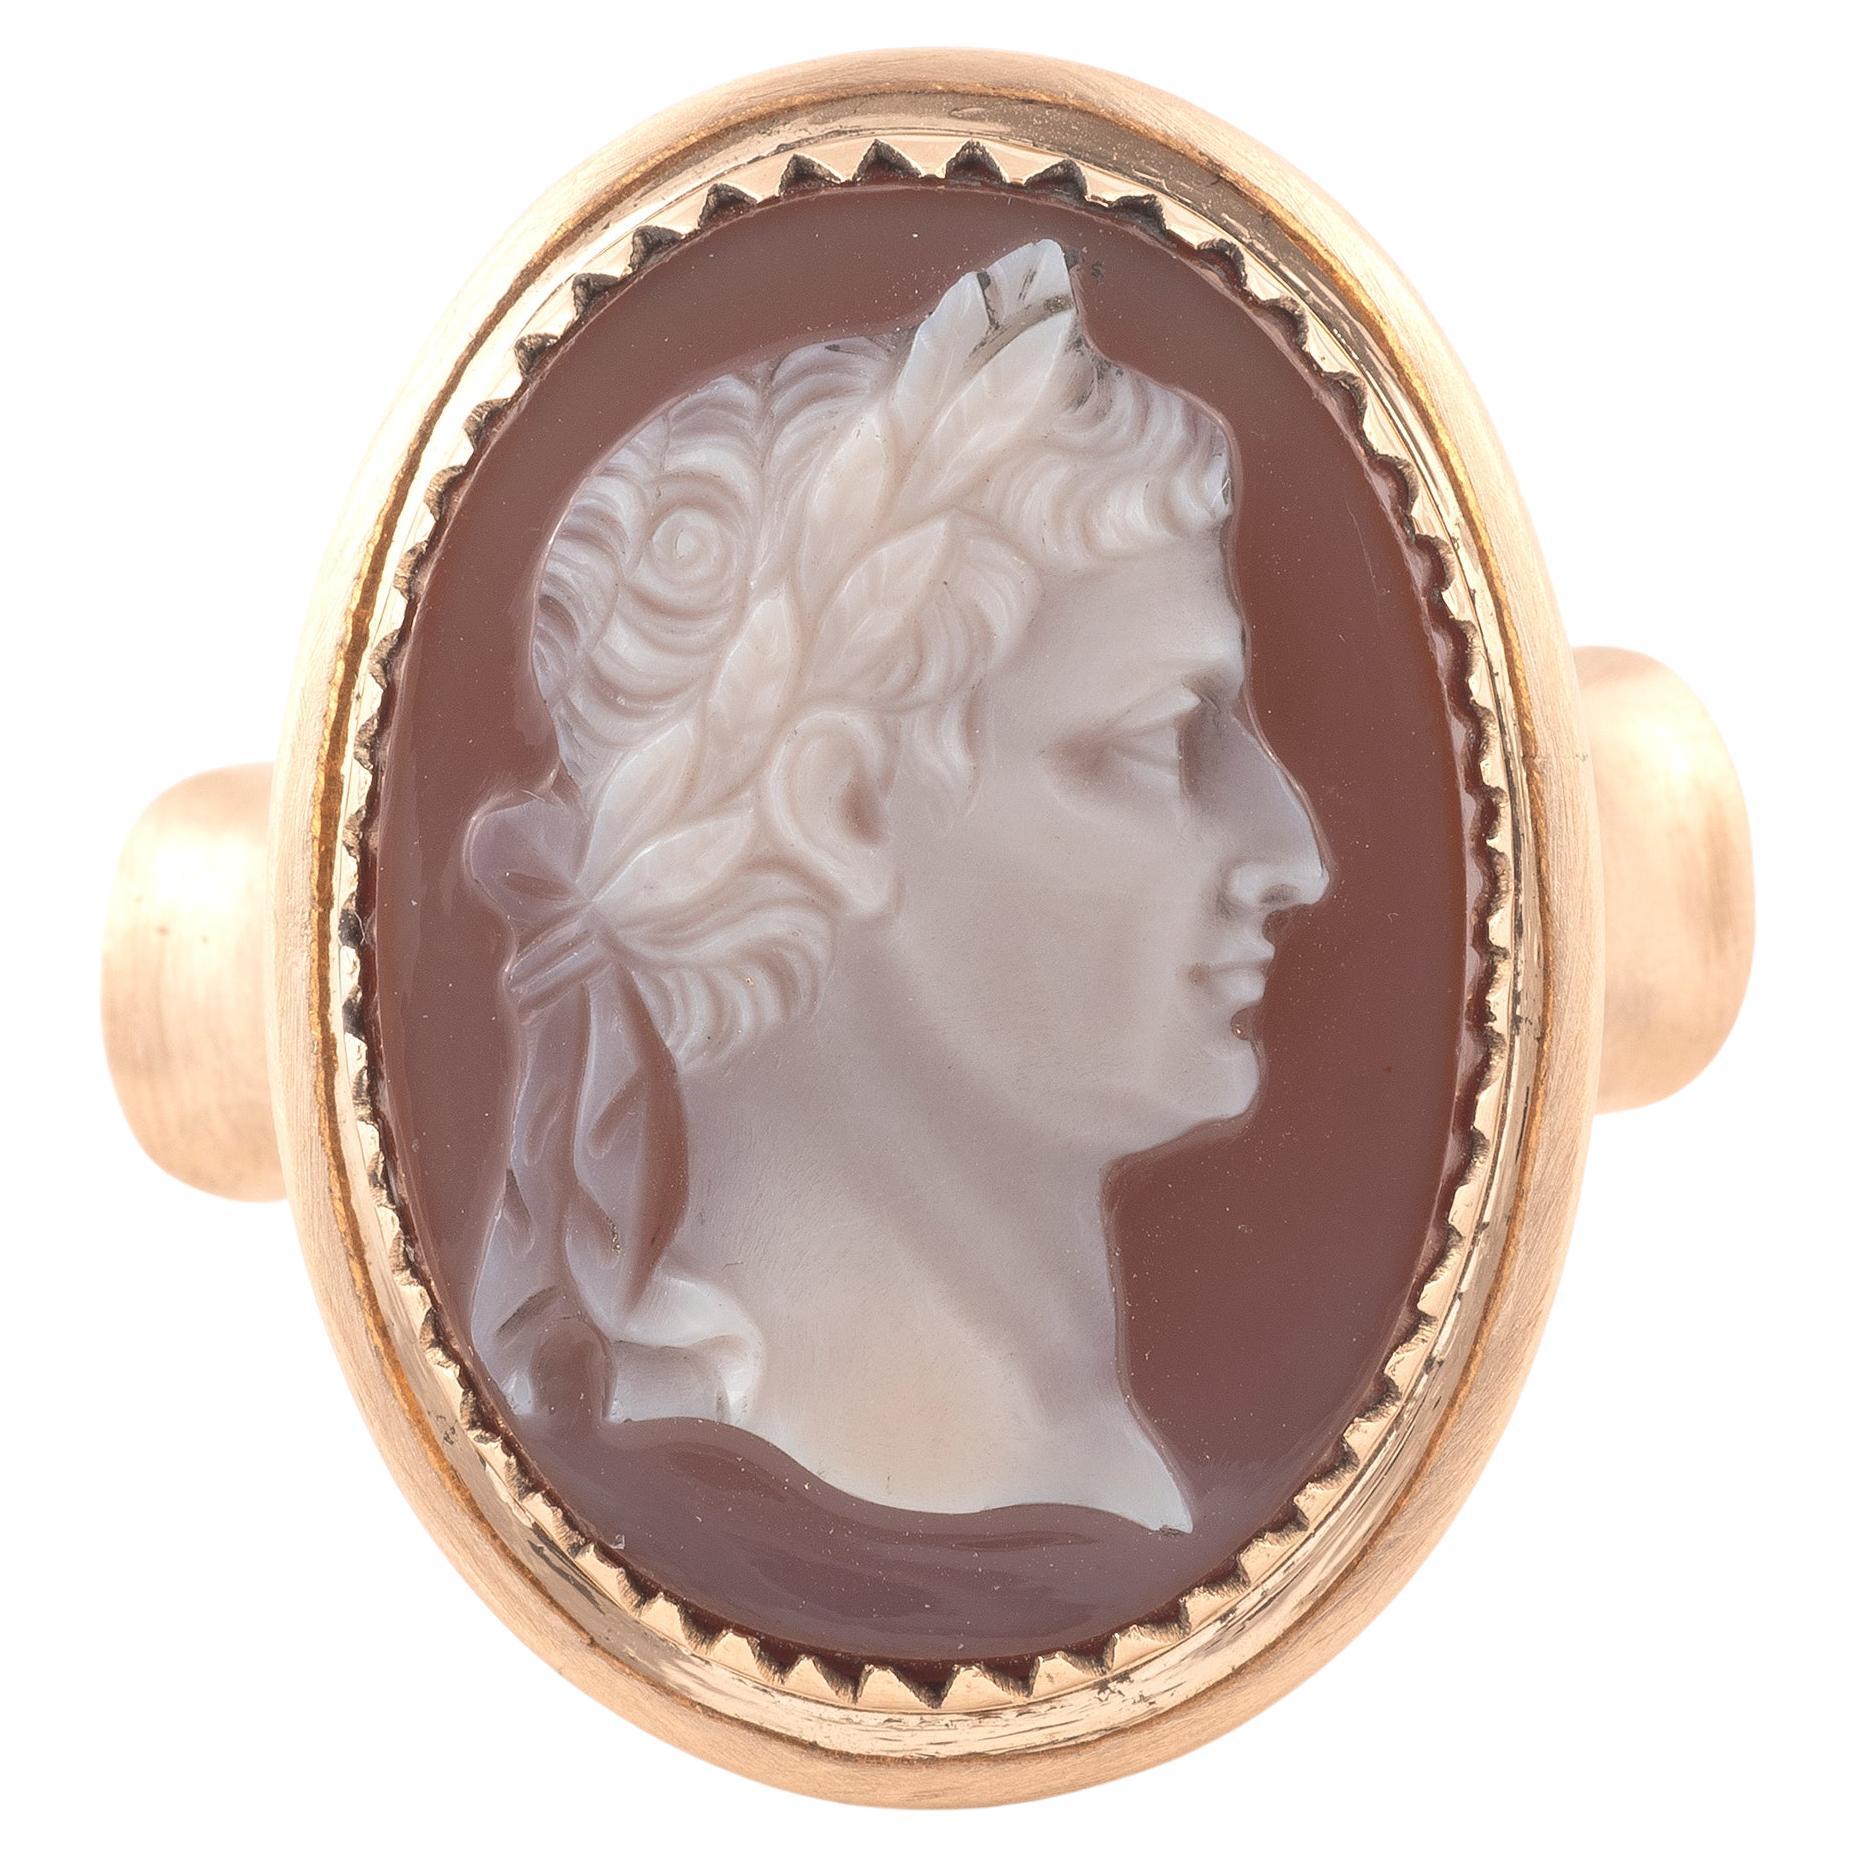 19th Century Gold and Onyx Cameo Portrait of the Emperor Claudius Ring